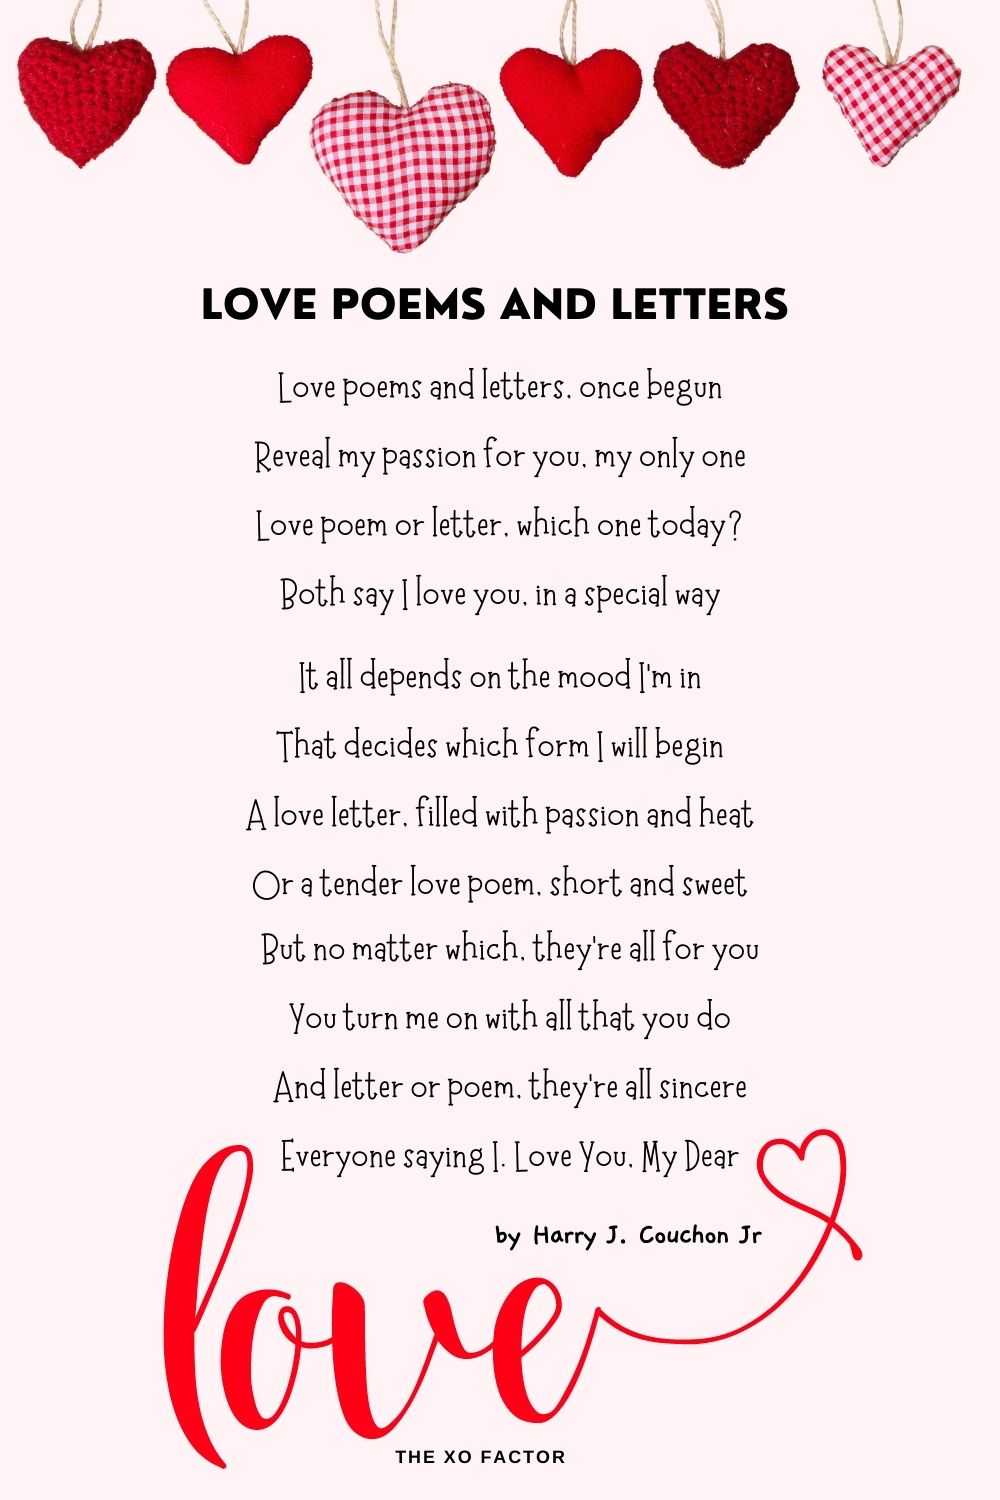 Love Poems And Letters  Poem by Harry J. Couchon Jr